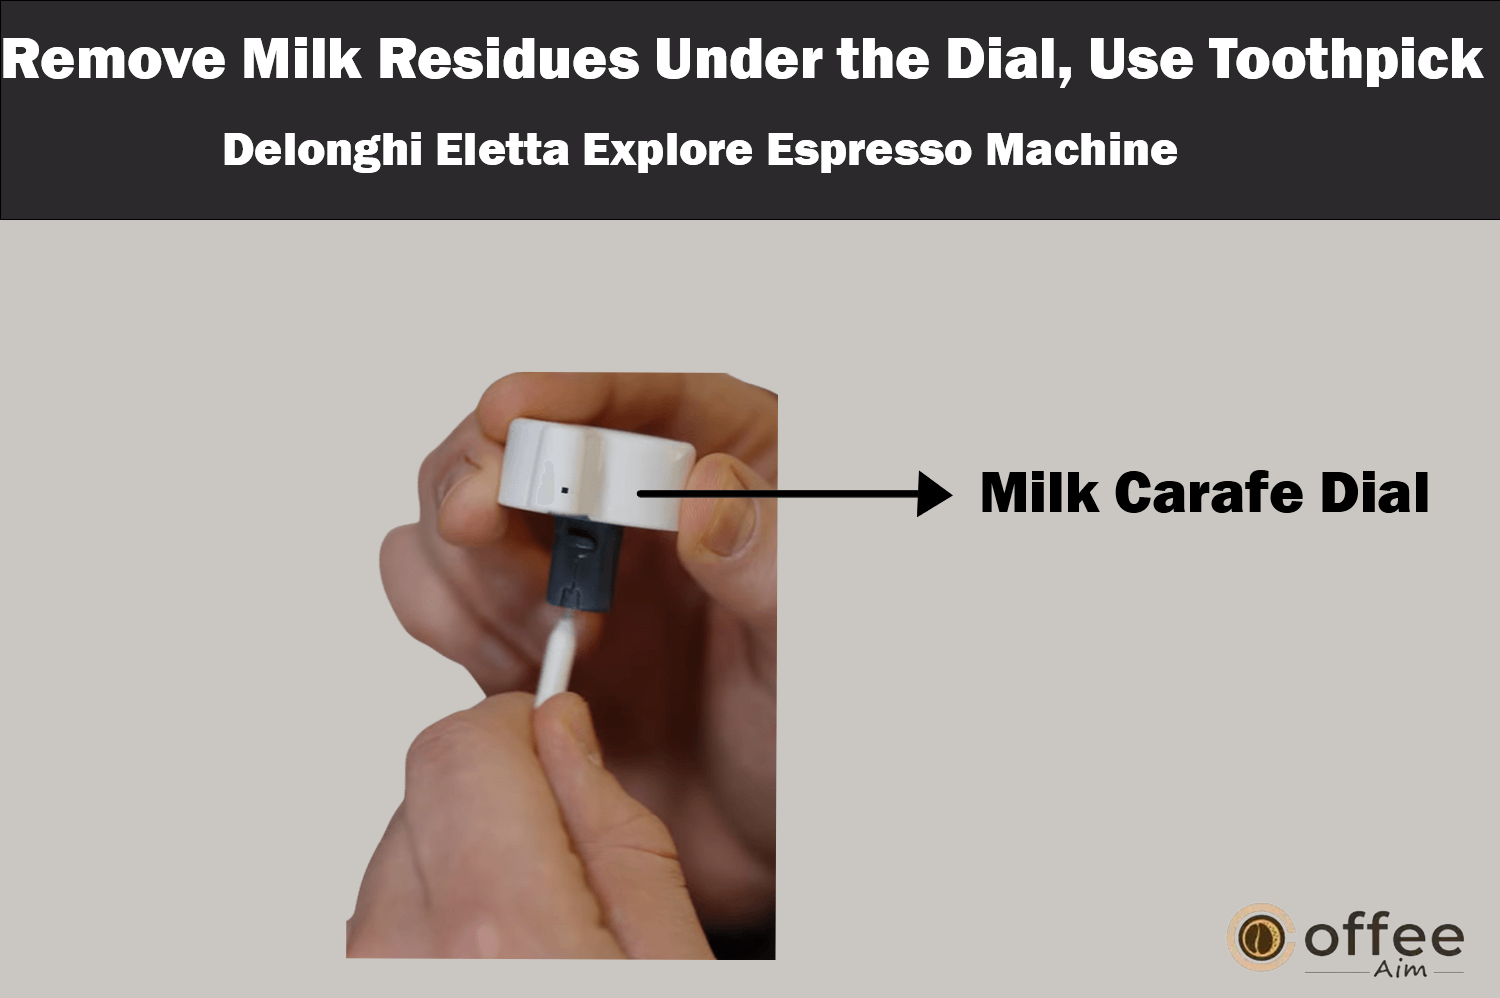 The image illustrates the step of removing milk residue from under the dial using a toothpick for the "Delonghi Eletta Explore Espresso Machine," as outlined in the article "How to Use the Delonghi Eletta Explore Espresso Machine."